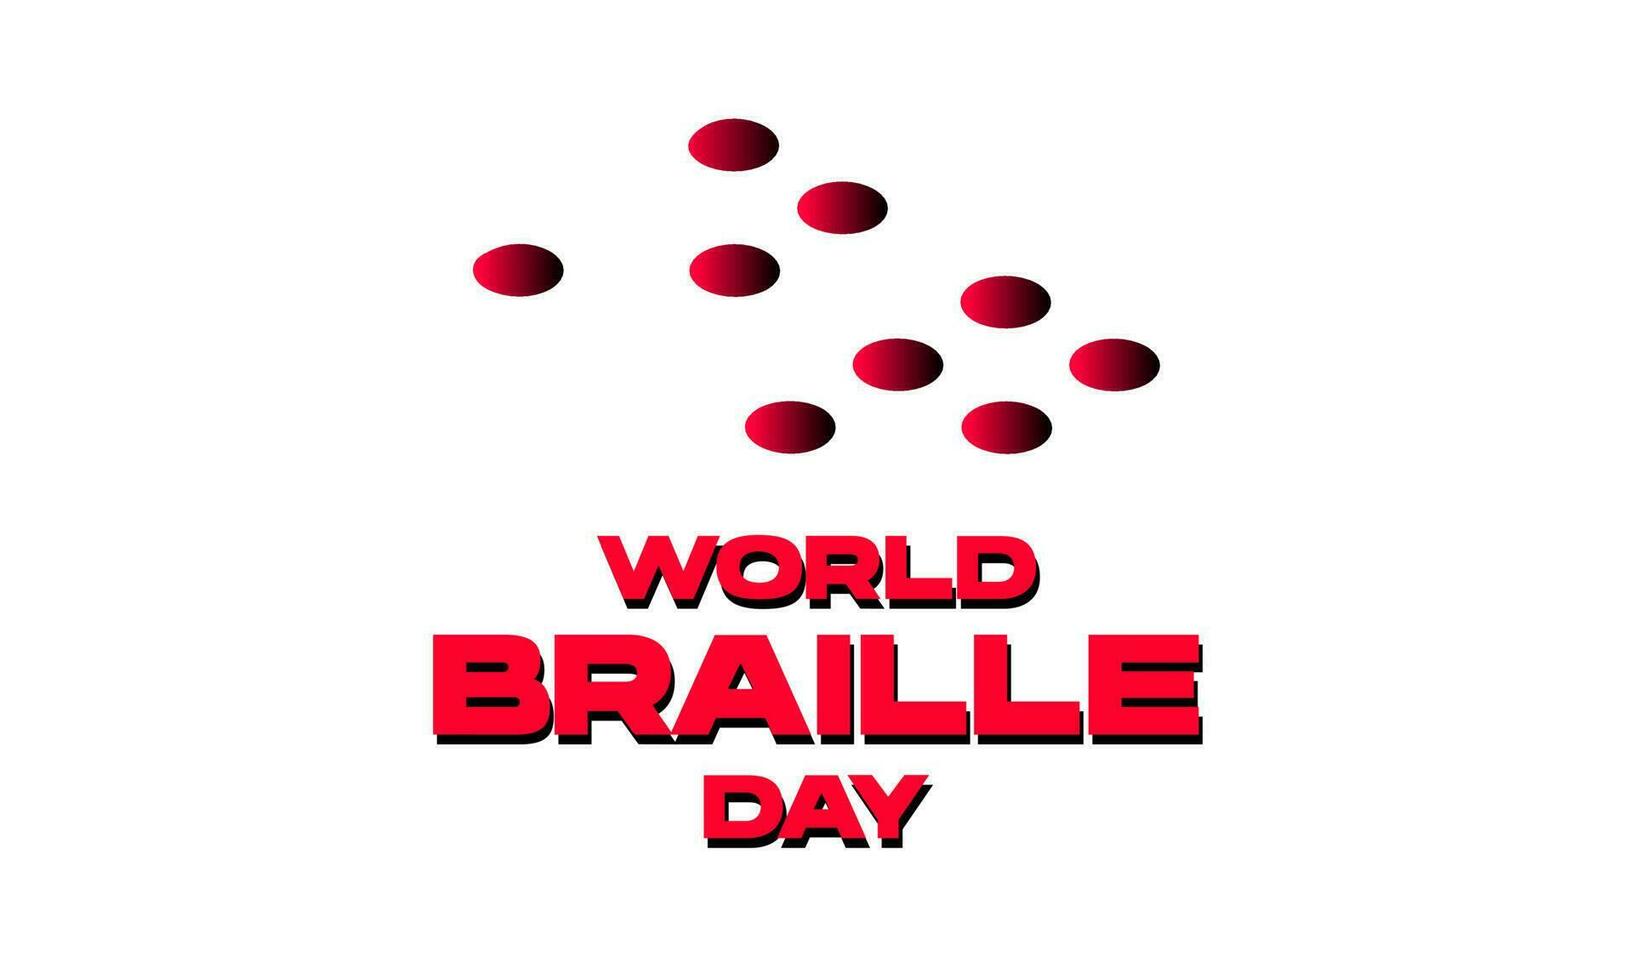 world braille day with holes dots gradient for banner, poster, social media vector